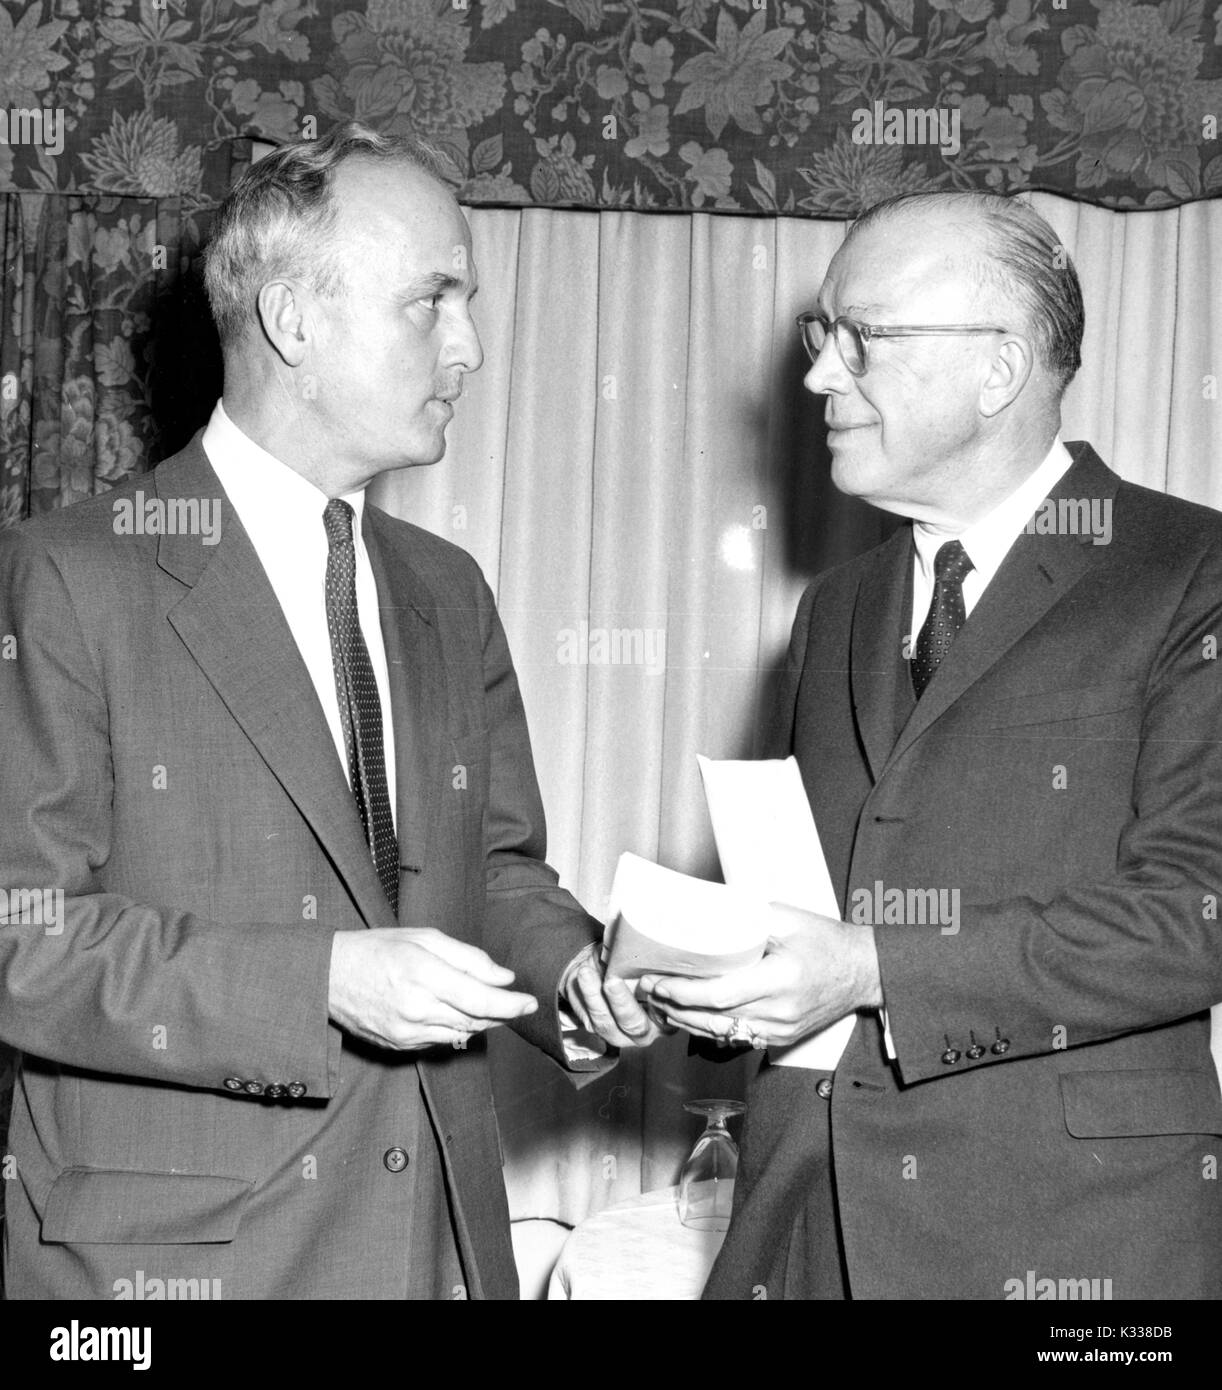 Milton Stover Eisenhower, President of Johns Hopkins University, stands wearing a suit while accepting an endowment from Congressman Peter H B Frelinghuysen from New Jersey, with a floral valence and curtain behind them, Baltimore, Maryland, 1965. Stock Photo